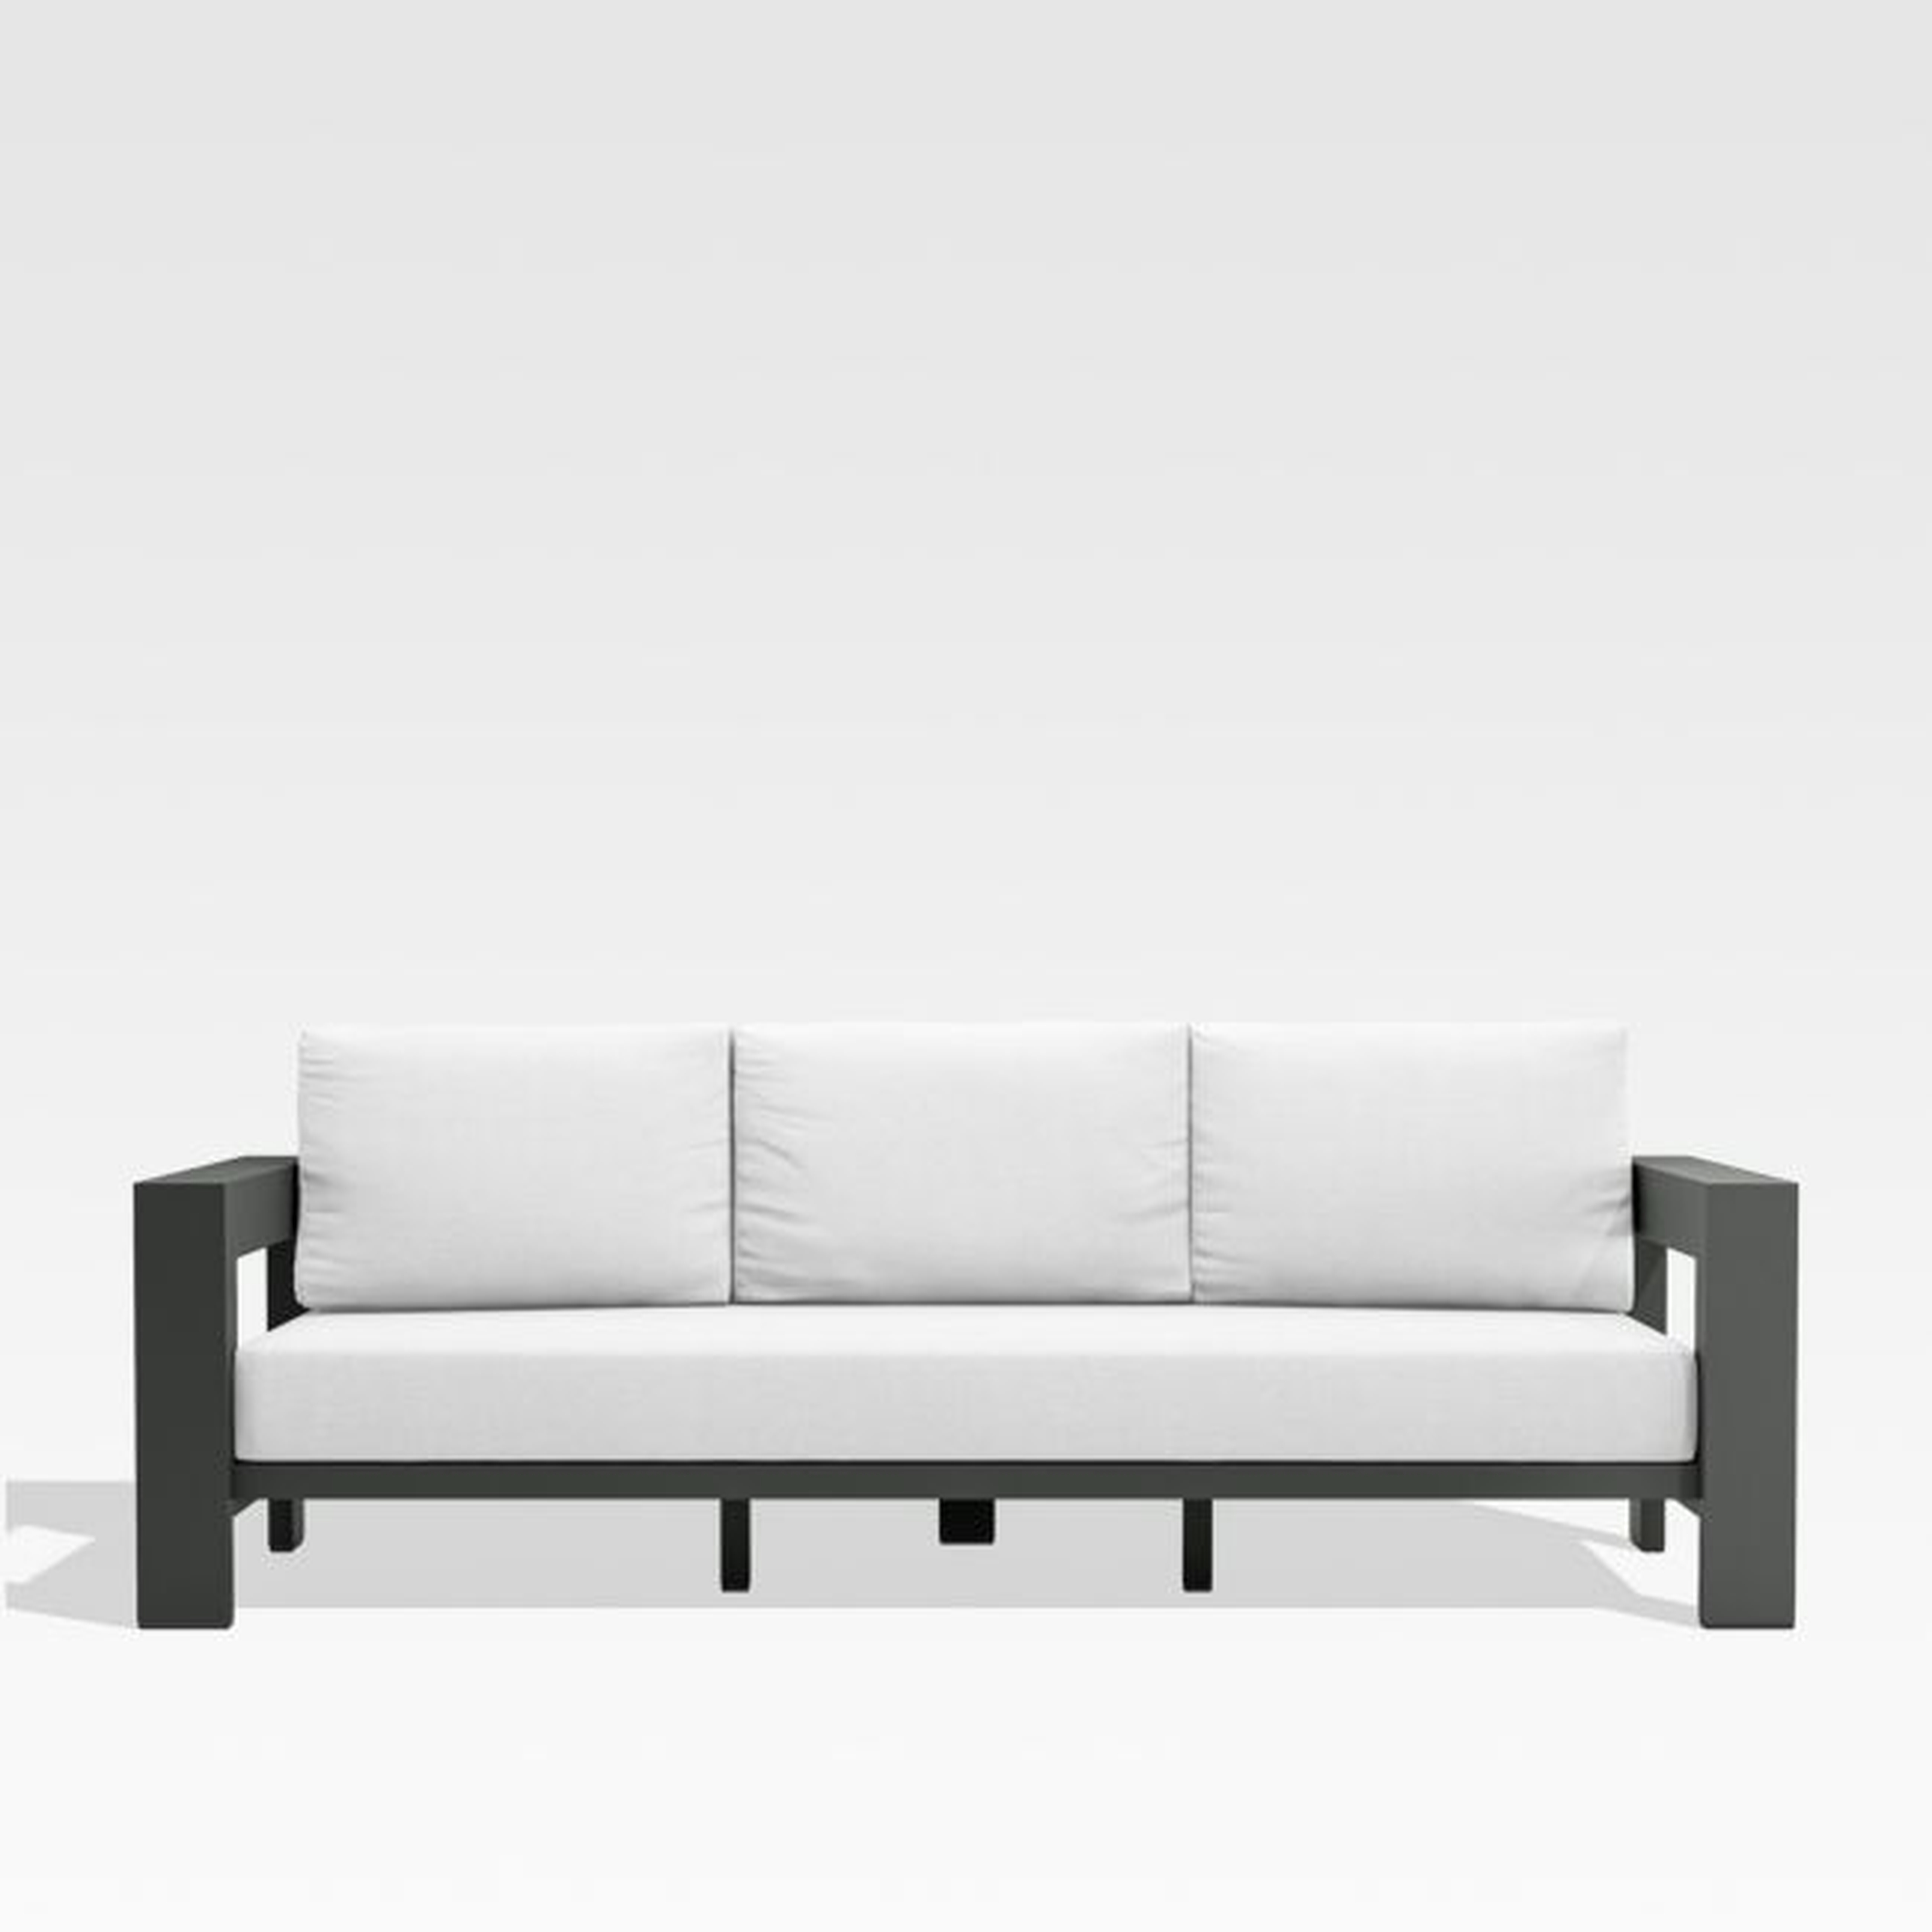 Walker Metal Outdoor Sofa with White Sunbrella ® Cushions - Crate and Barrel